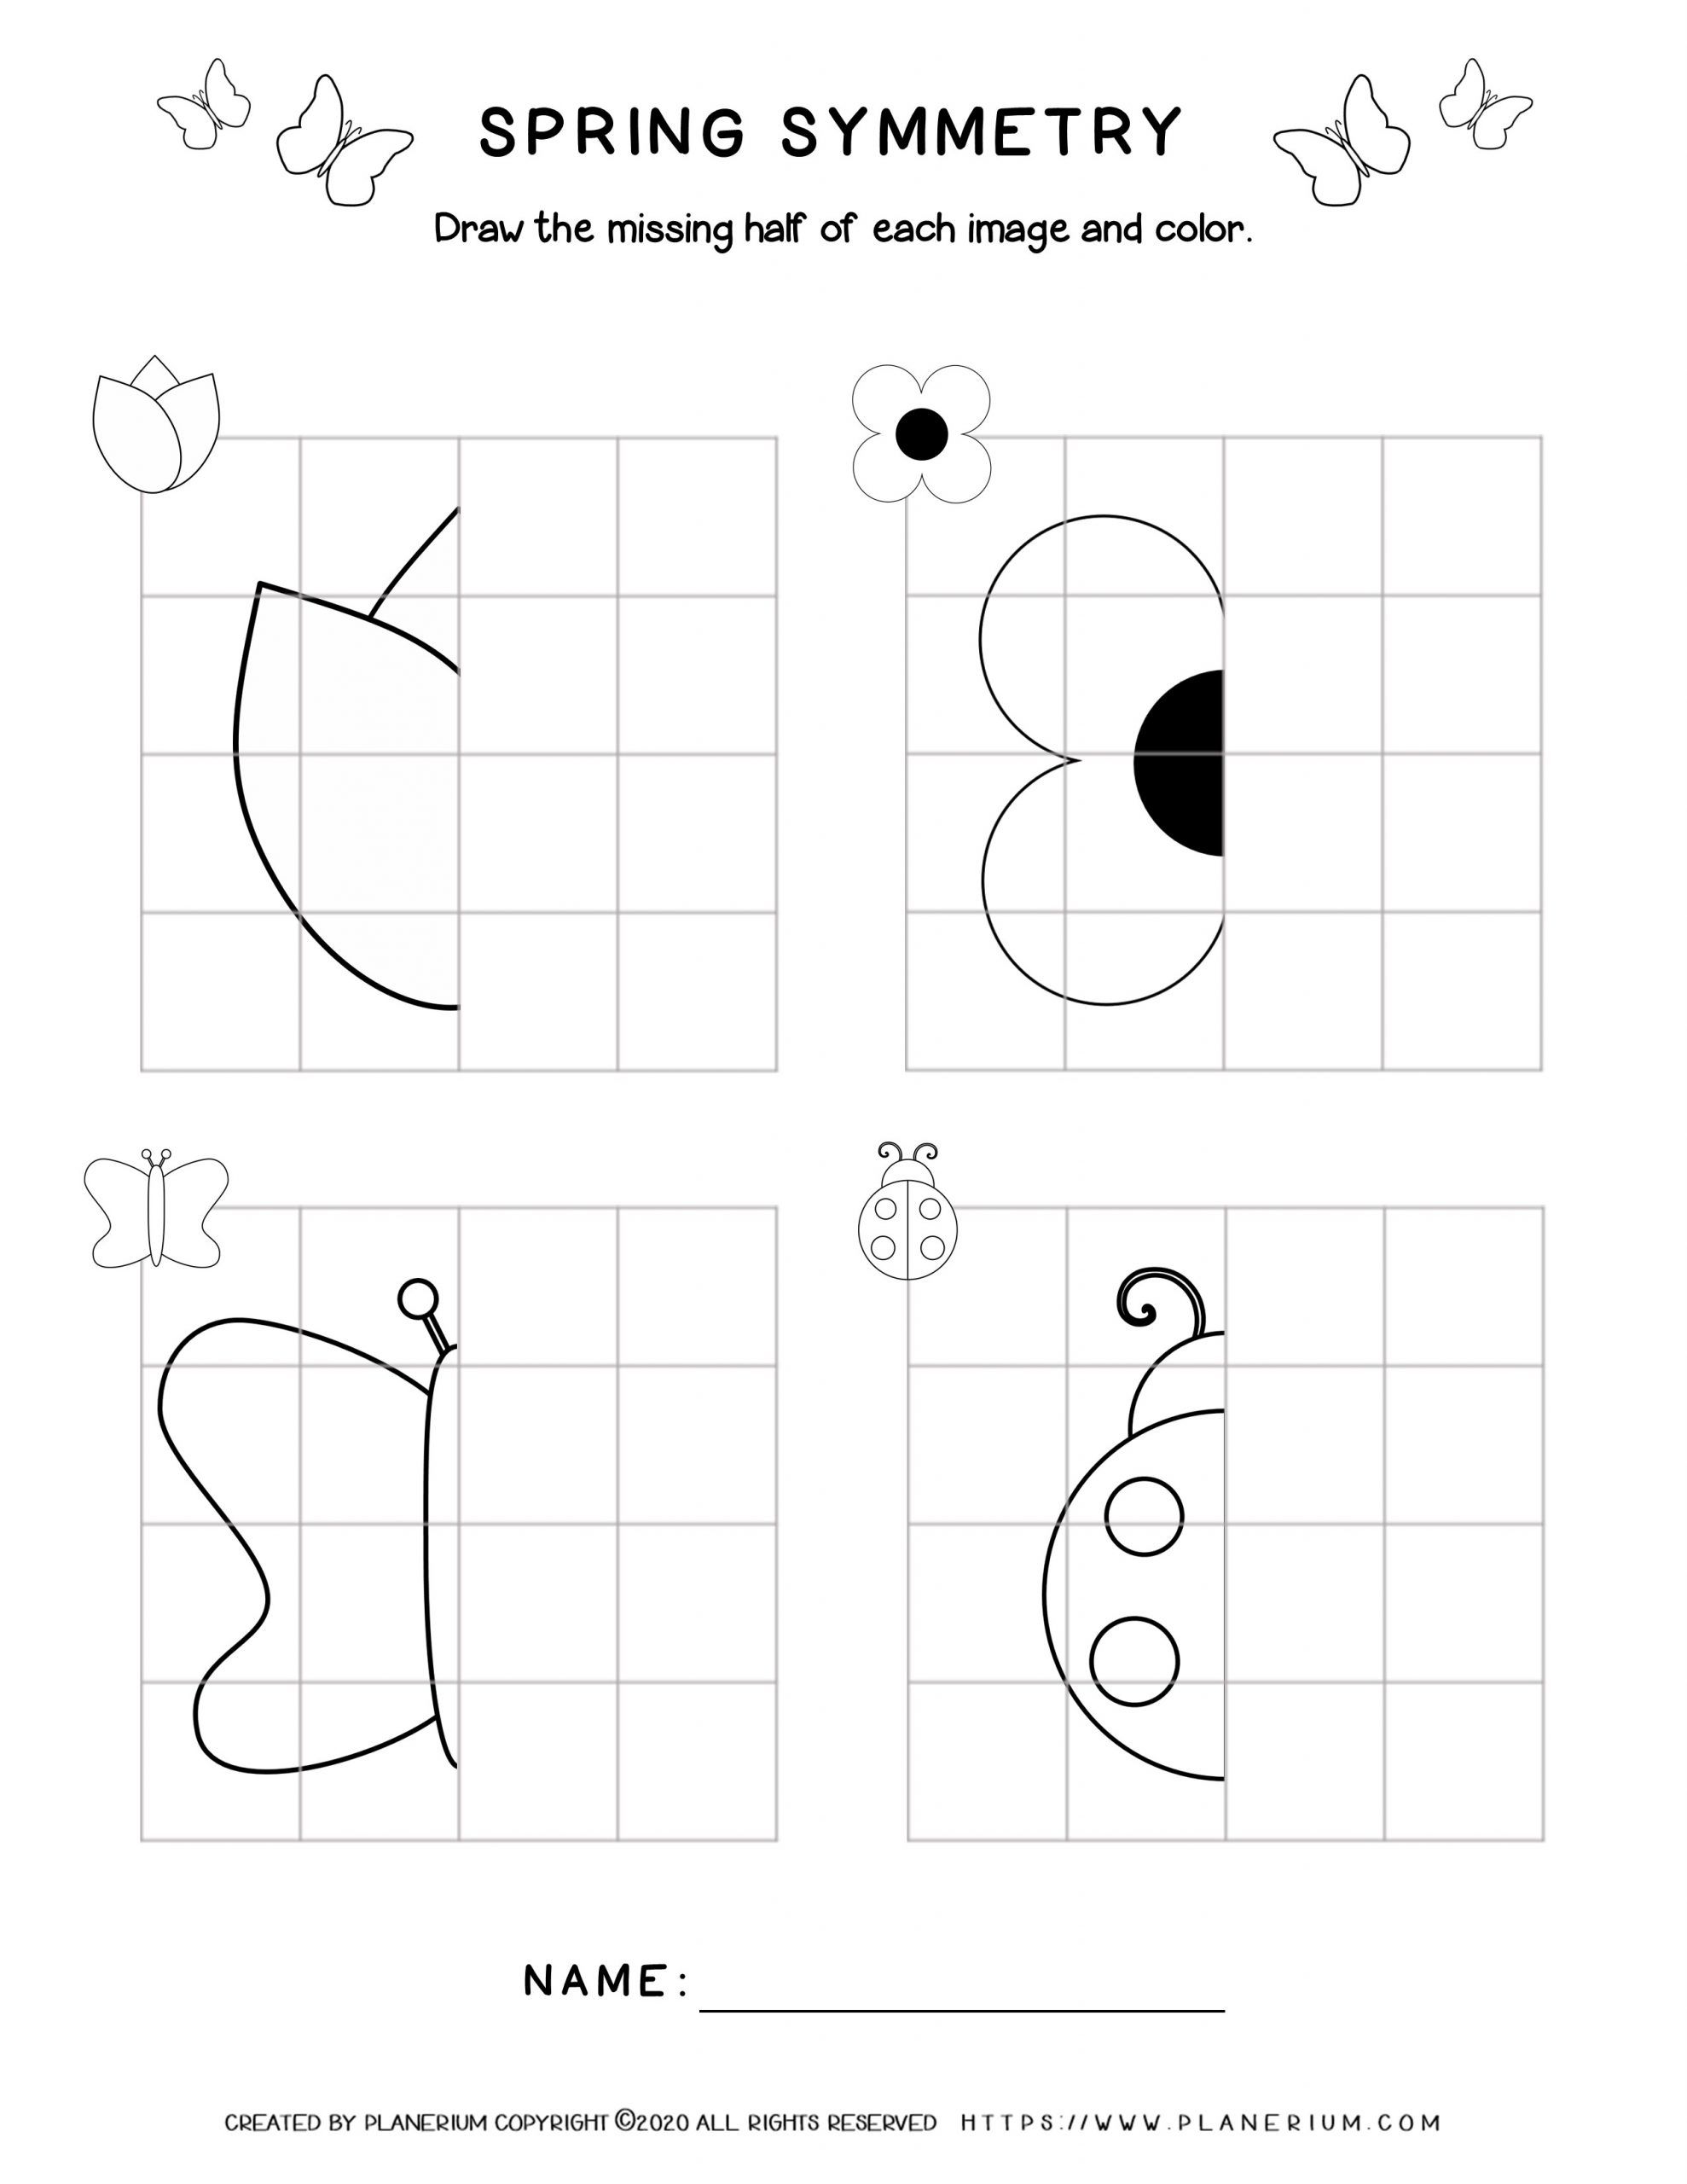 symmetry-drawing-worksheets